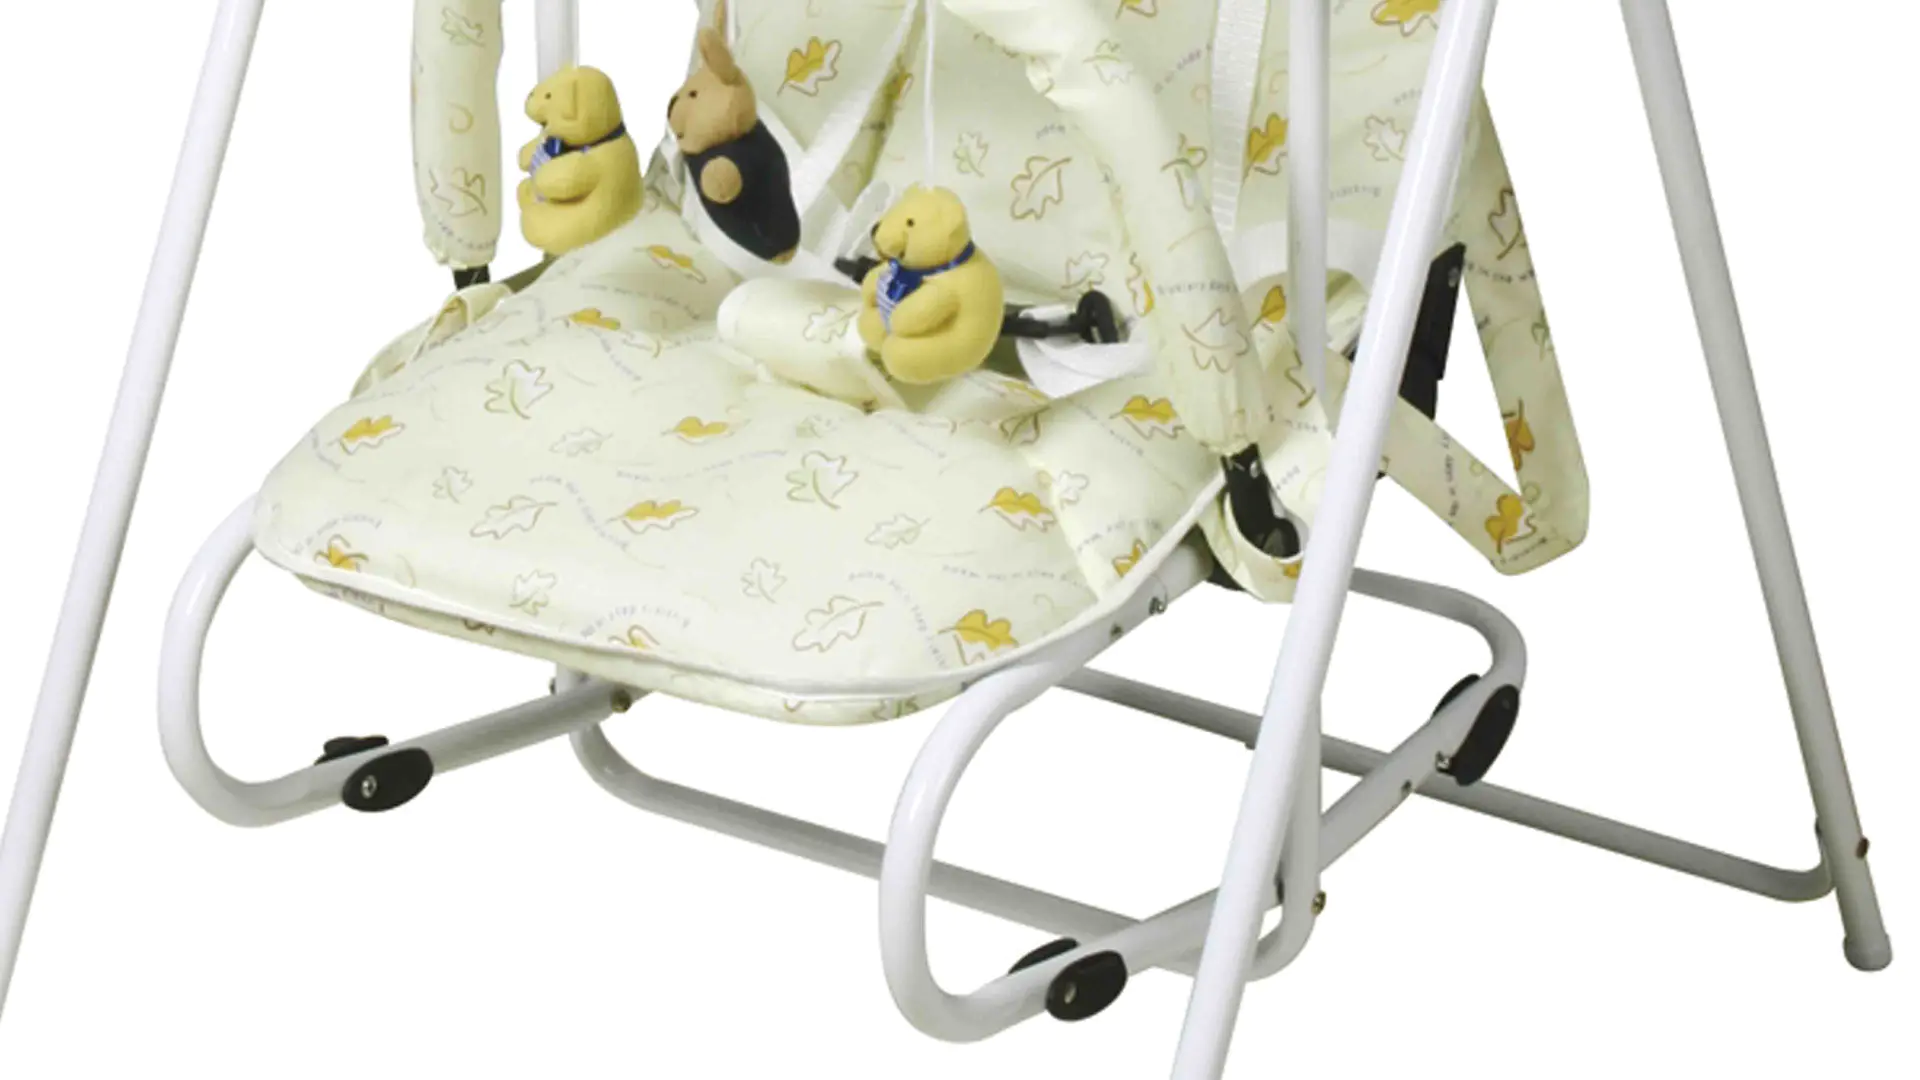 Aoqi multifunctional upright baby swing design for babys room